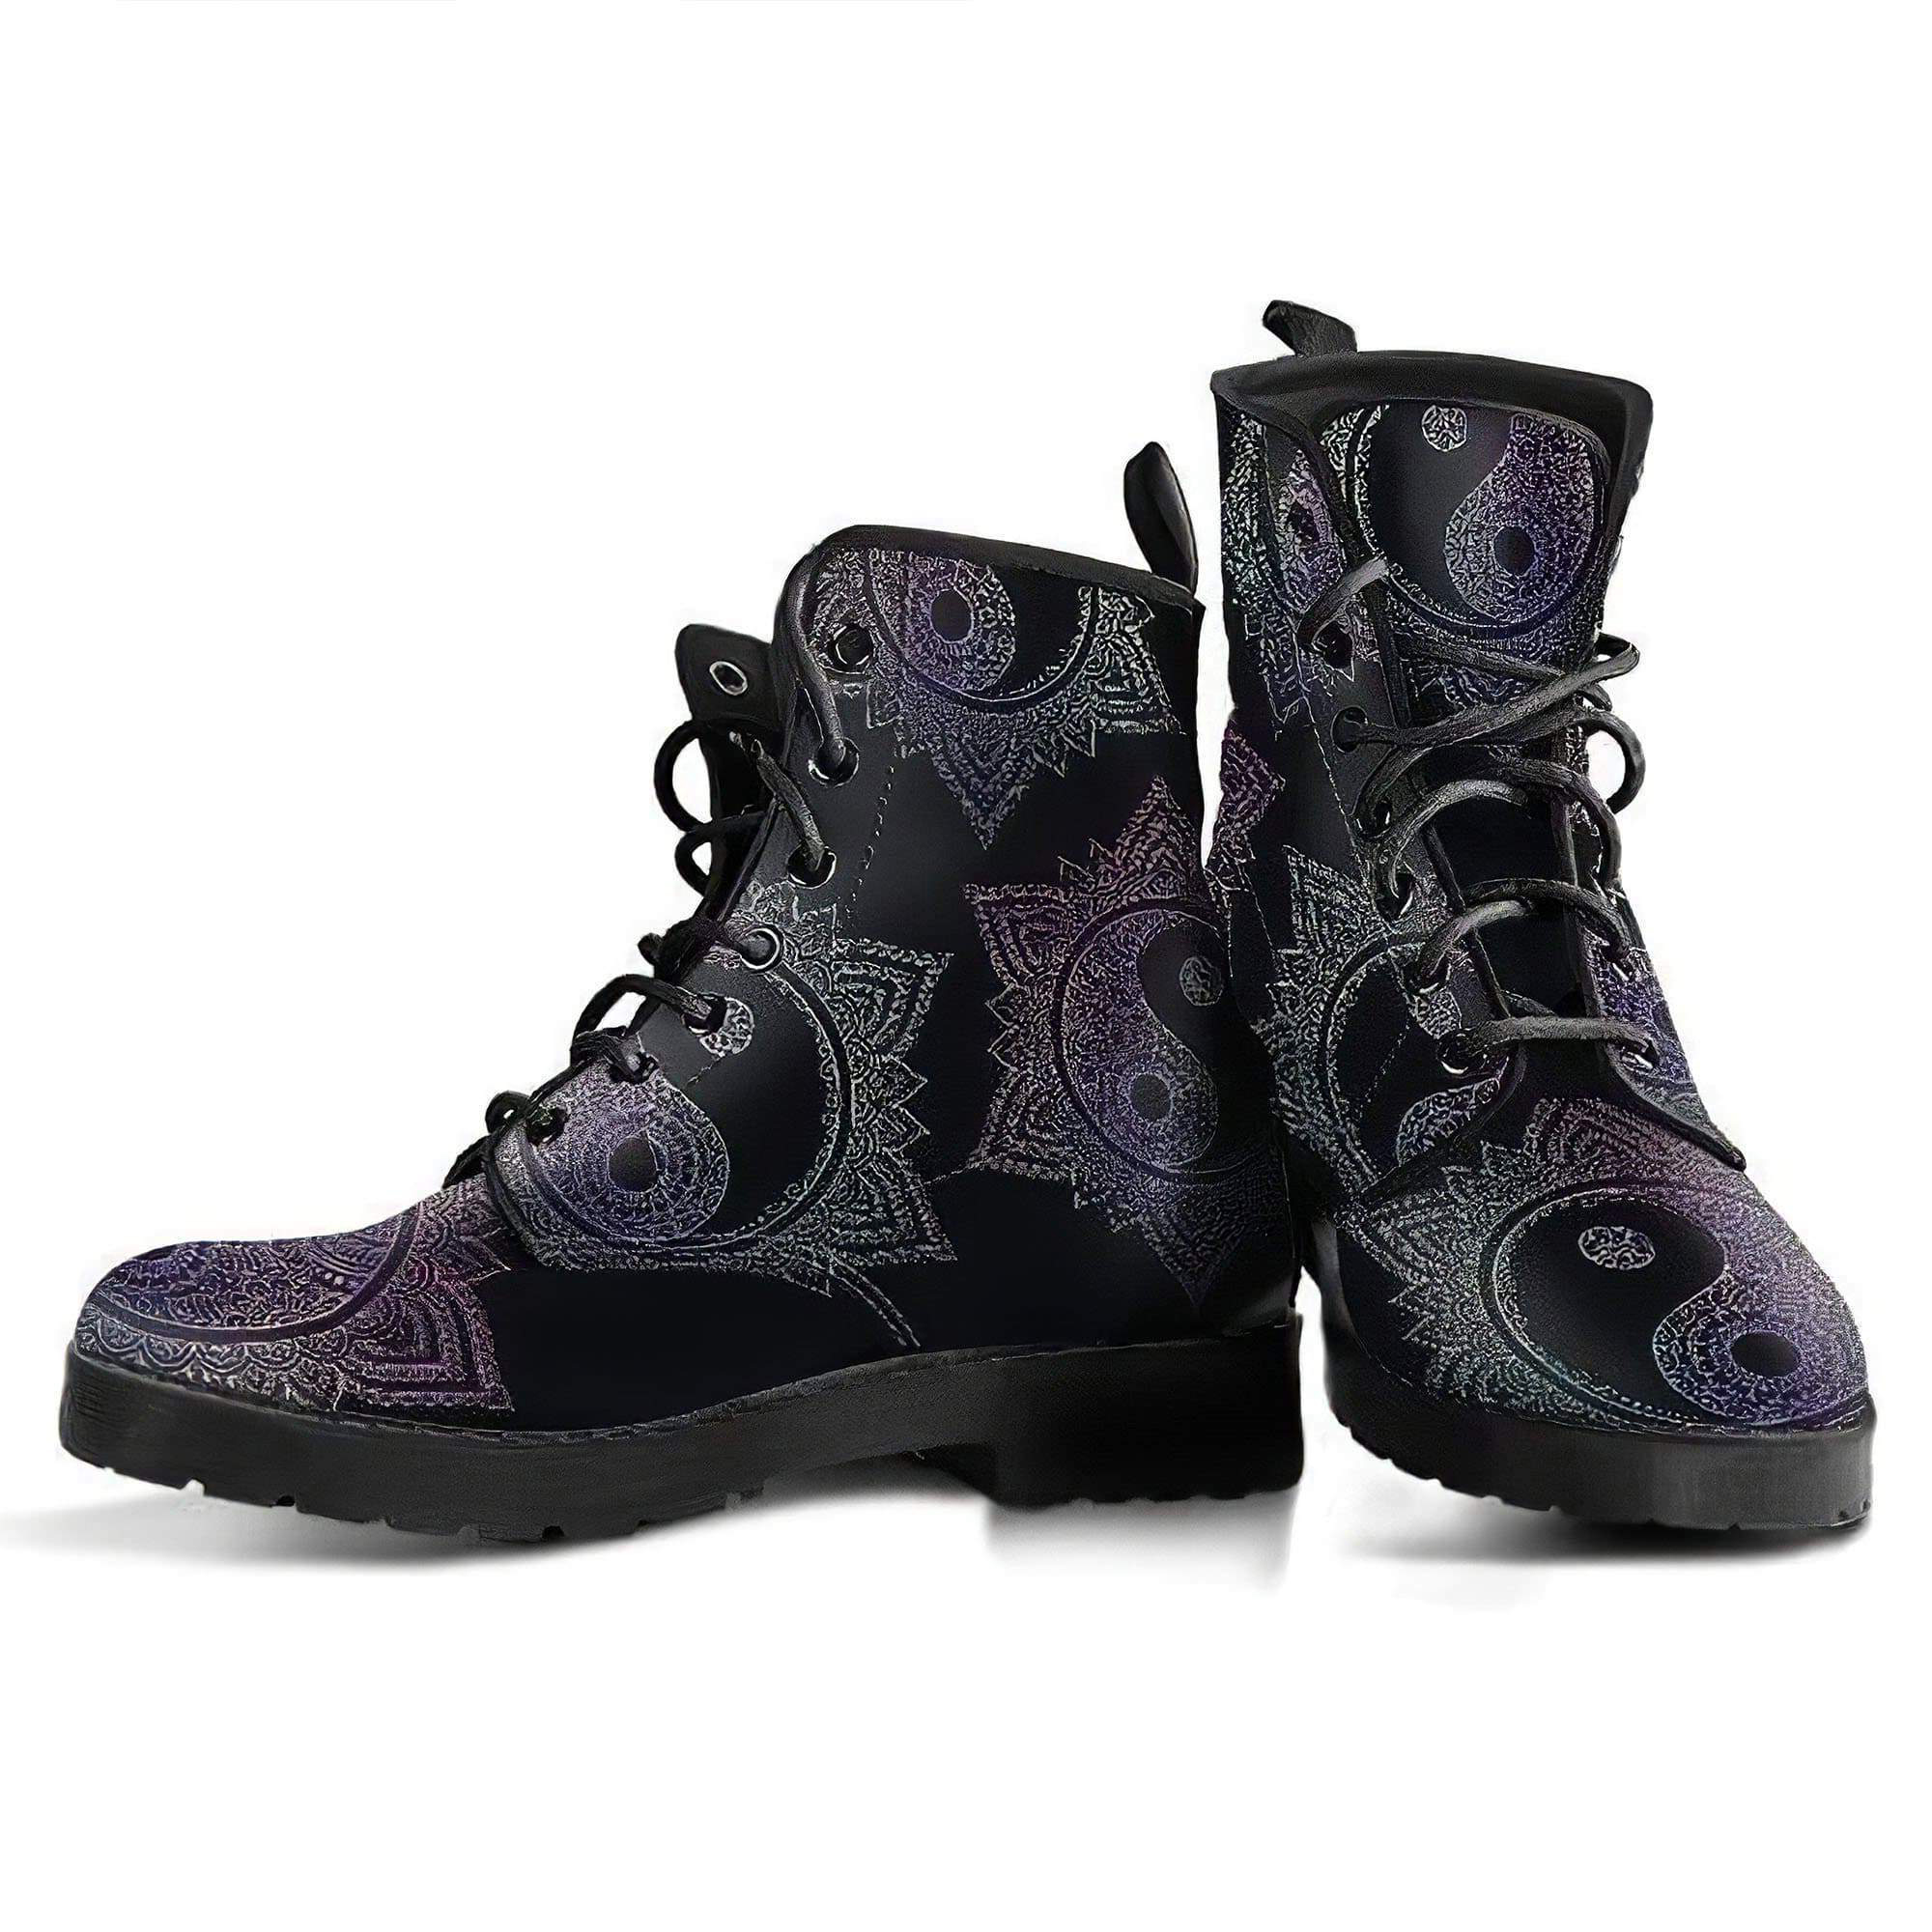 yinyang-mandala-handcrafted-boots-women-s-leather-boots-12051985465405.jpg